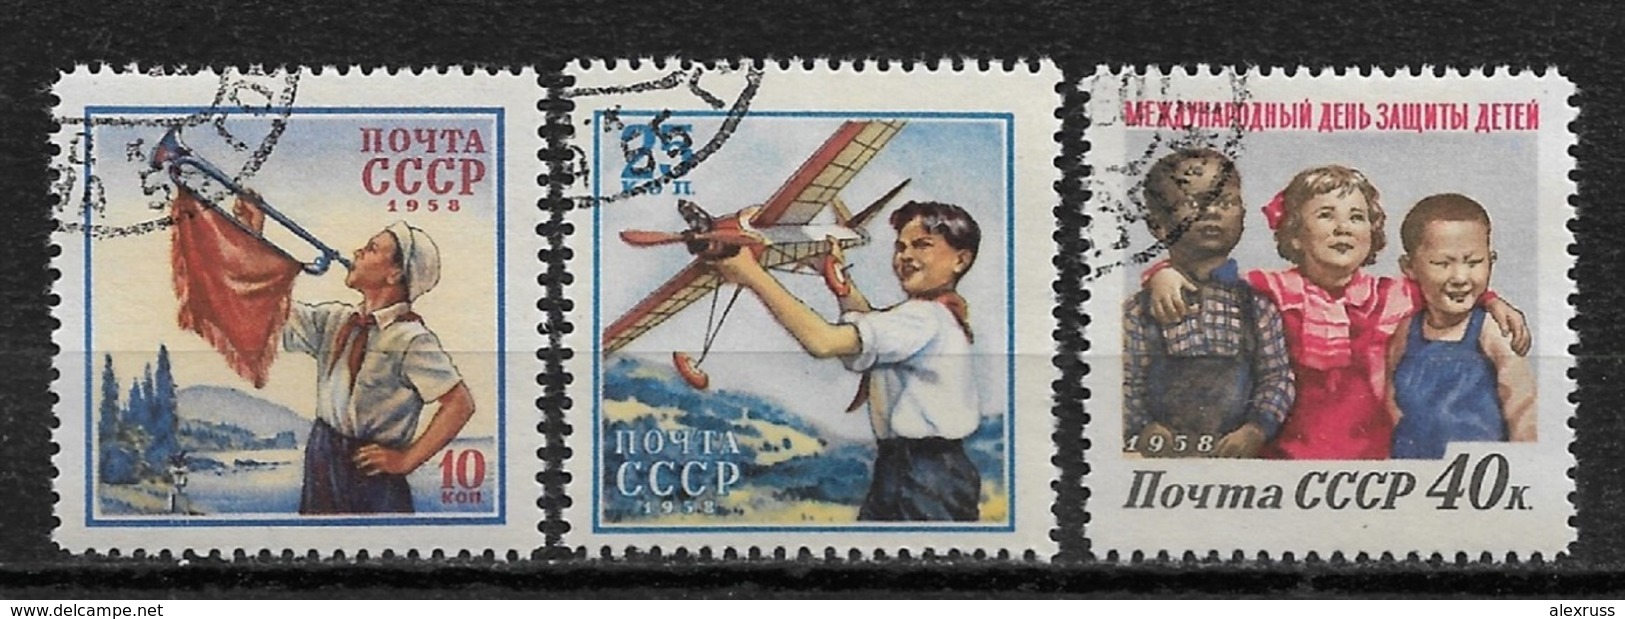 Russia/USSR 1958,Protection Of Children,Scott # 2068-2070,VF CTO NH**OG (RU-3) - Unused Stamps